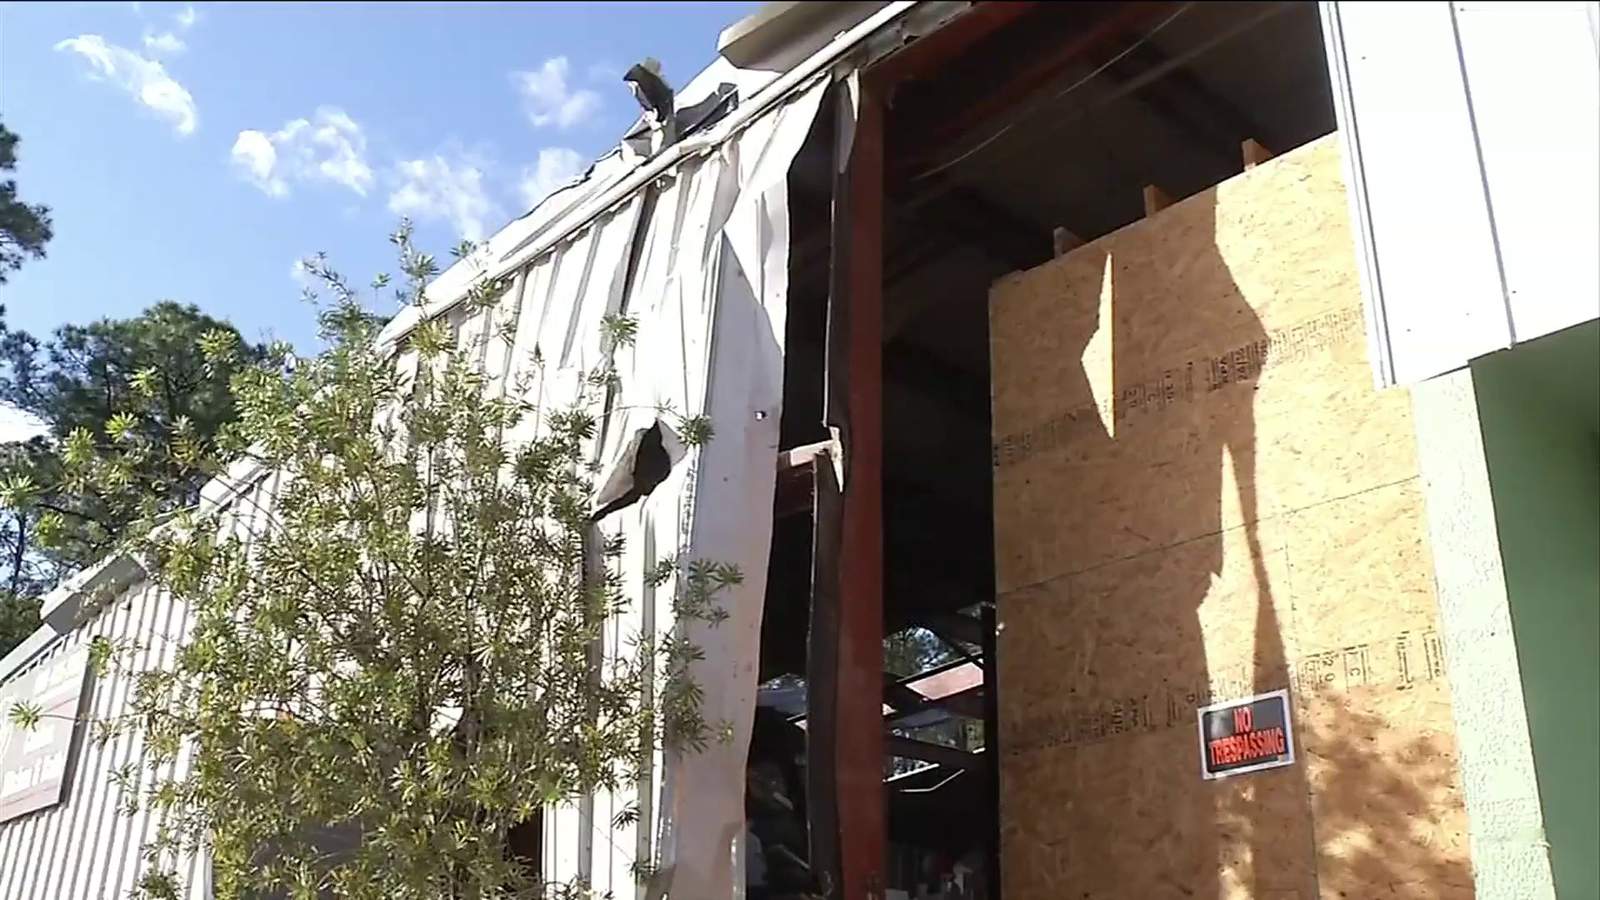 St. Johns County business picks up pieces after severe storm